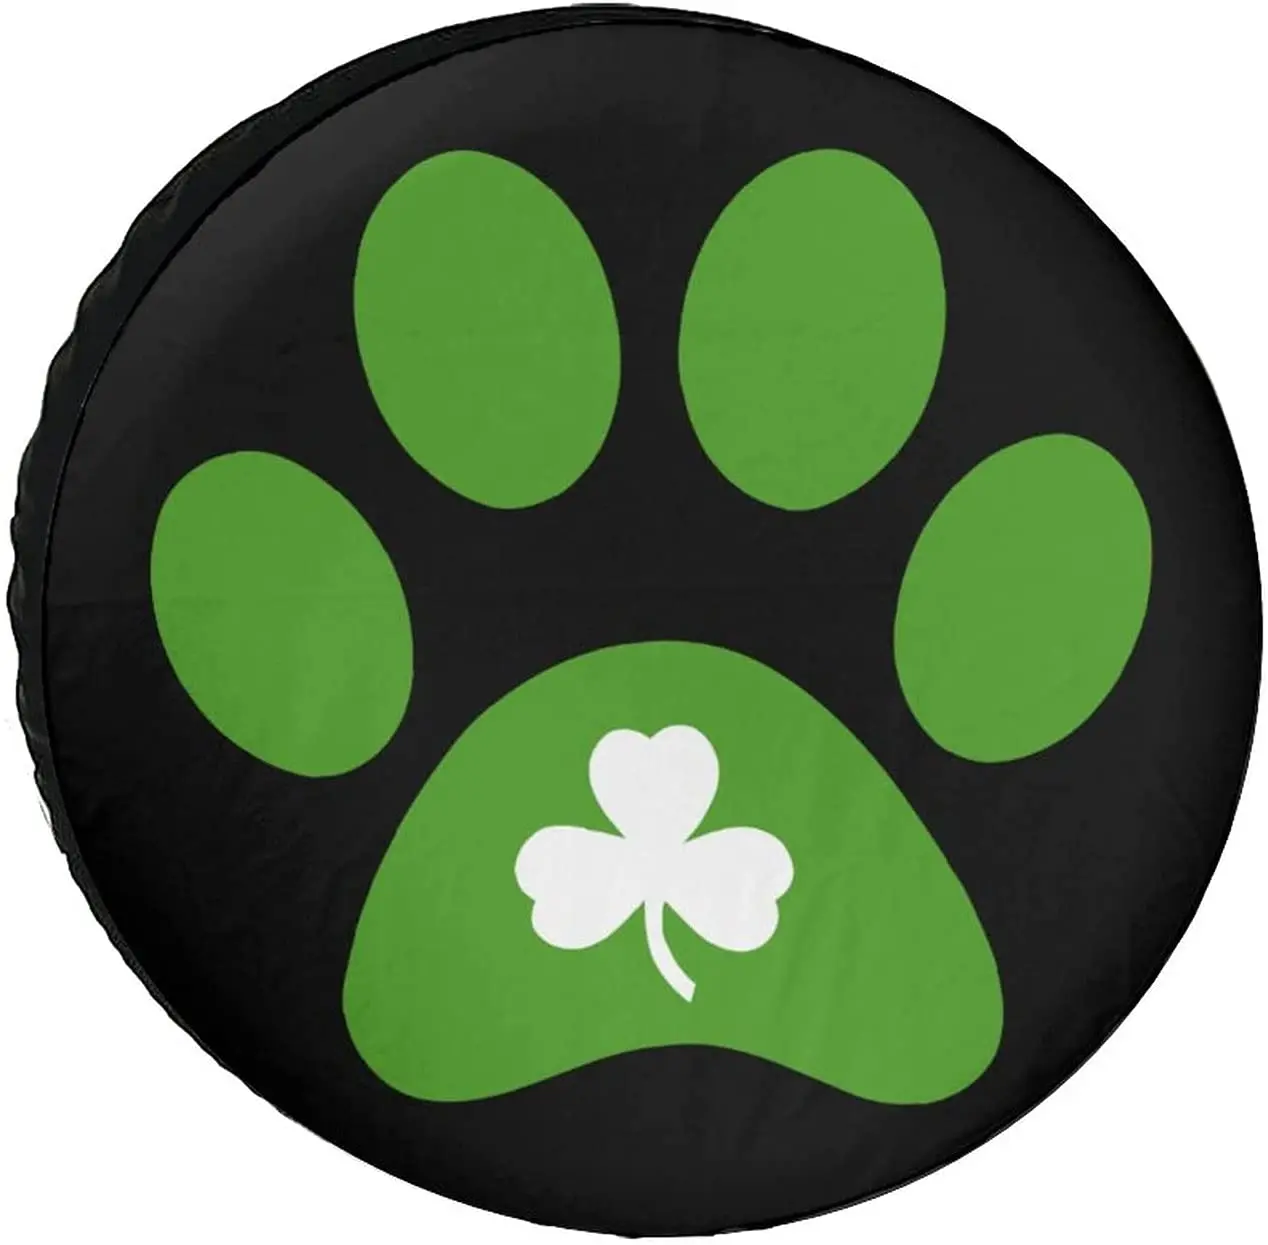 

Dog Paw Print Clover Funny Spare Tire Cover Camping Wheel Protectors Printed for RV SUV Truck Trailer 14" 15" 16" 17" Inch